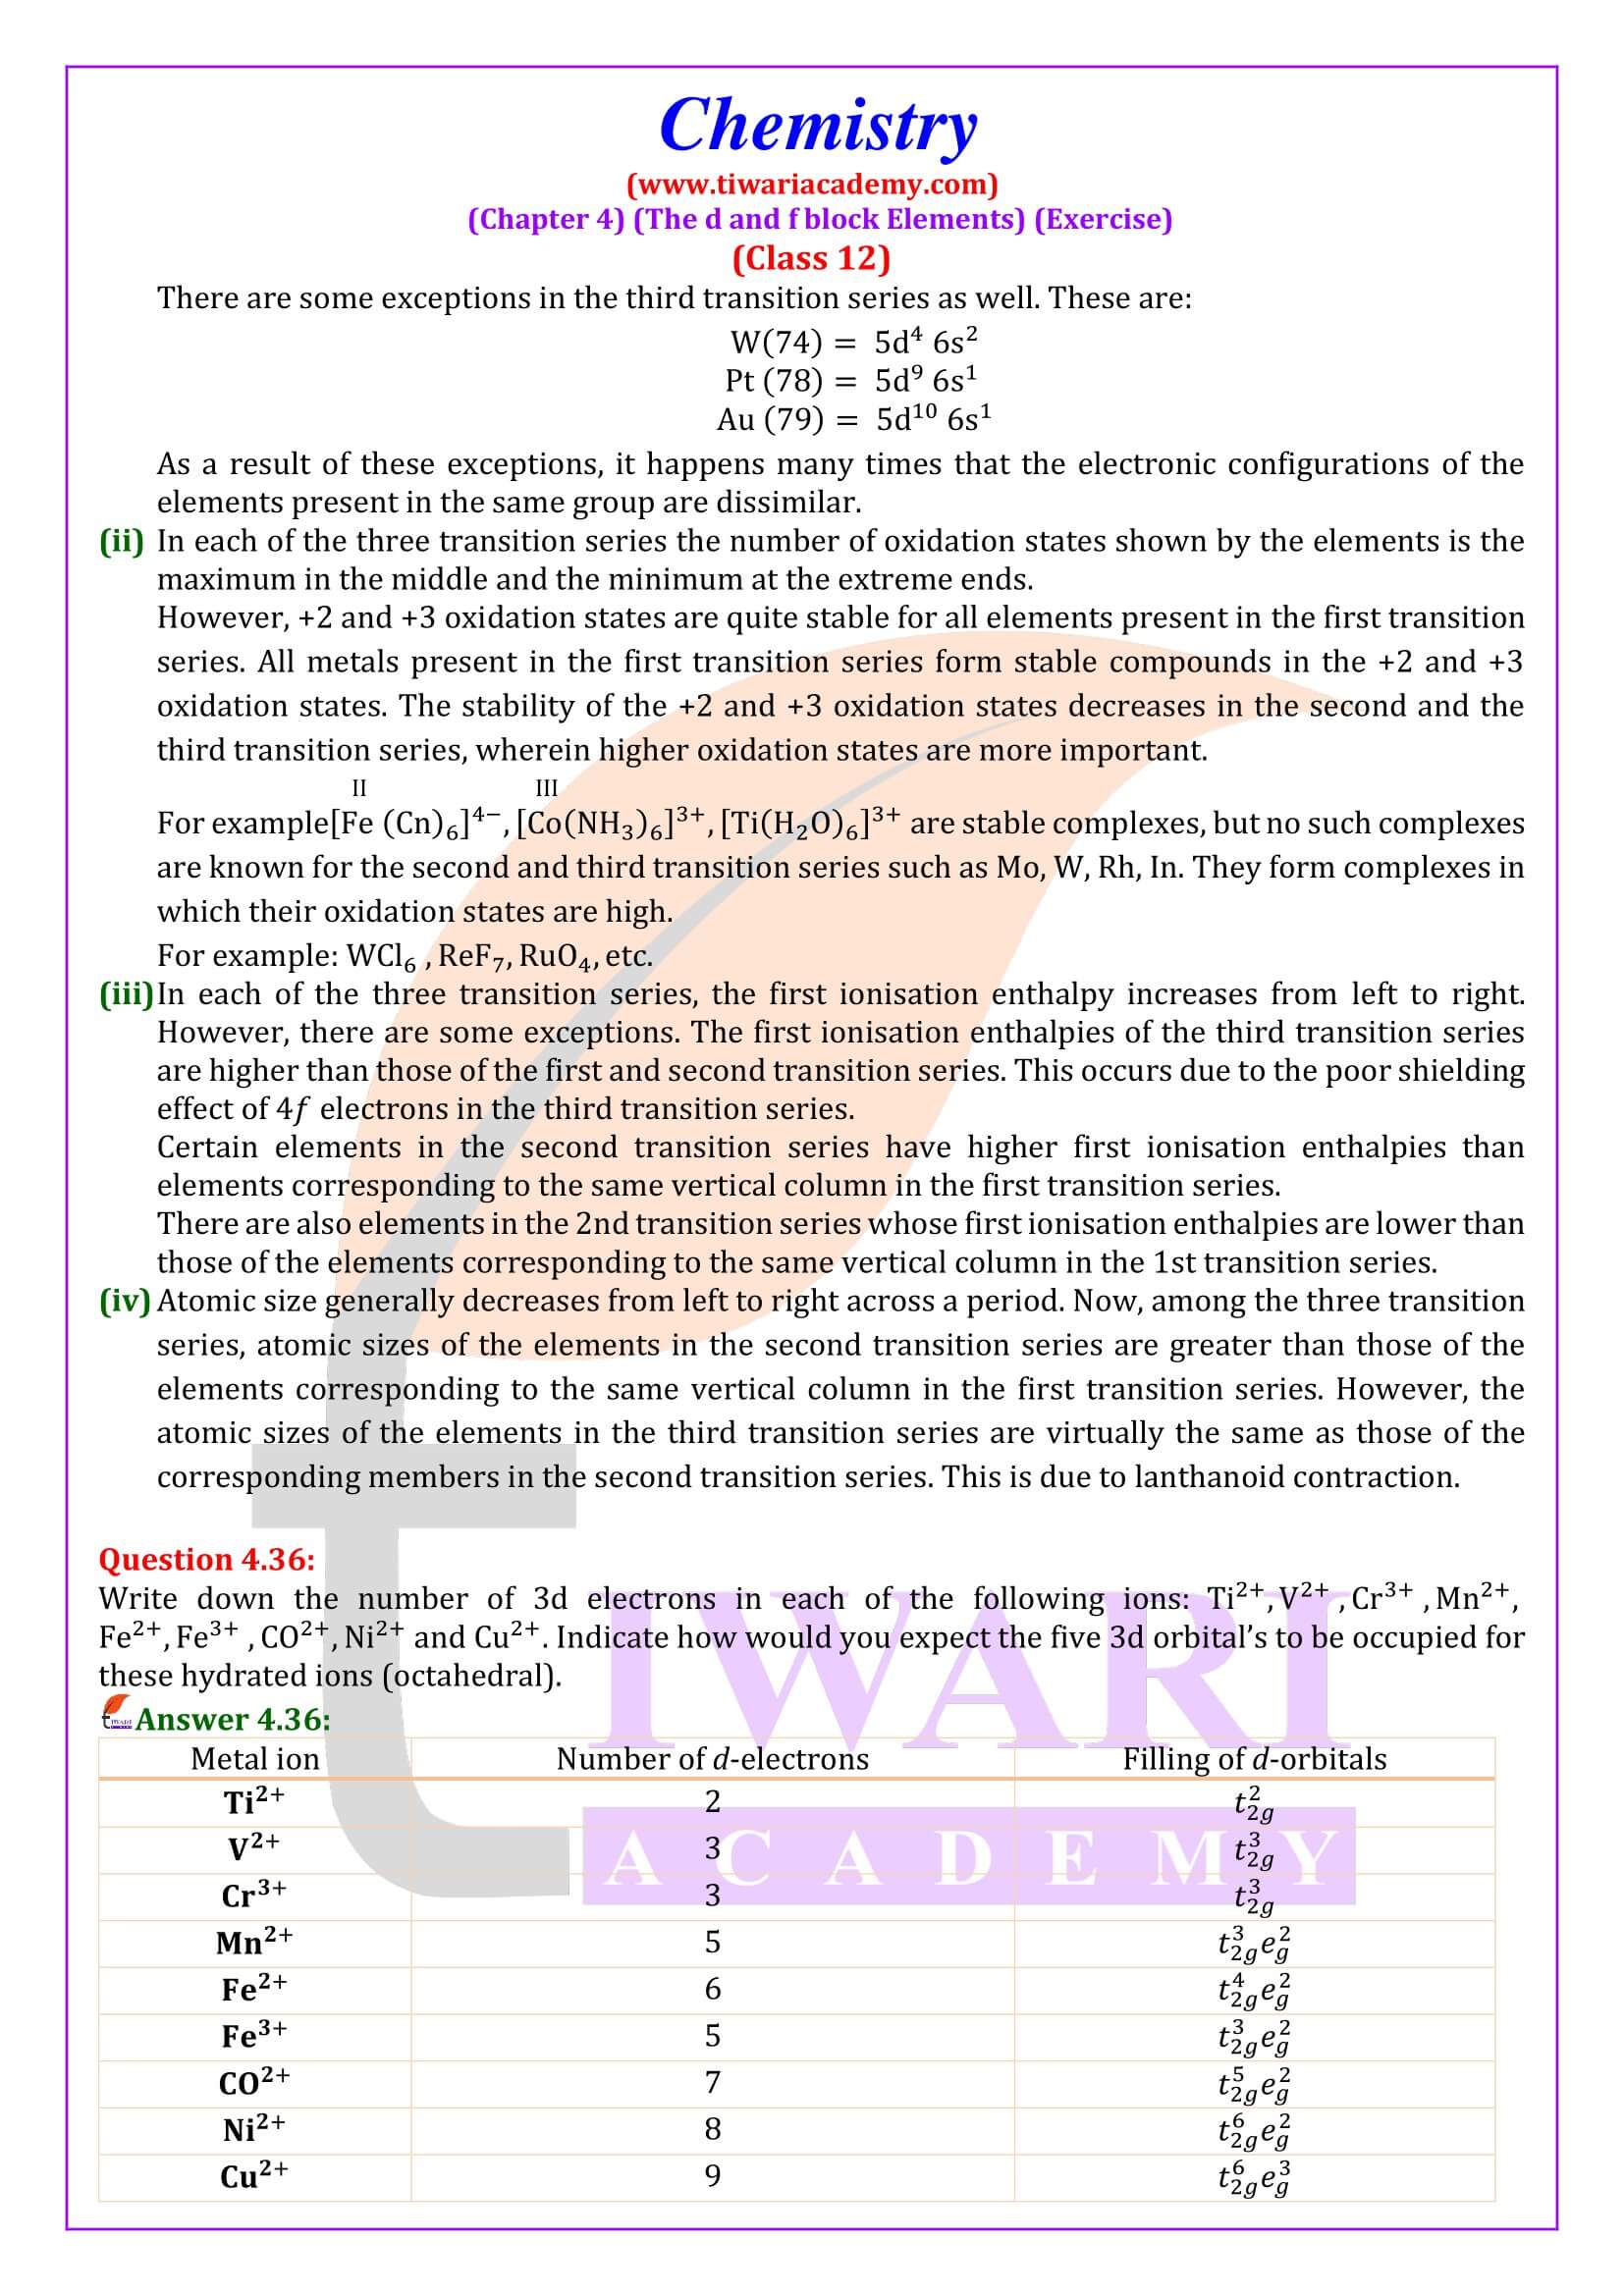 Class 12 Chemistry Chapter 4 solution in English